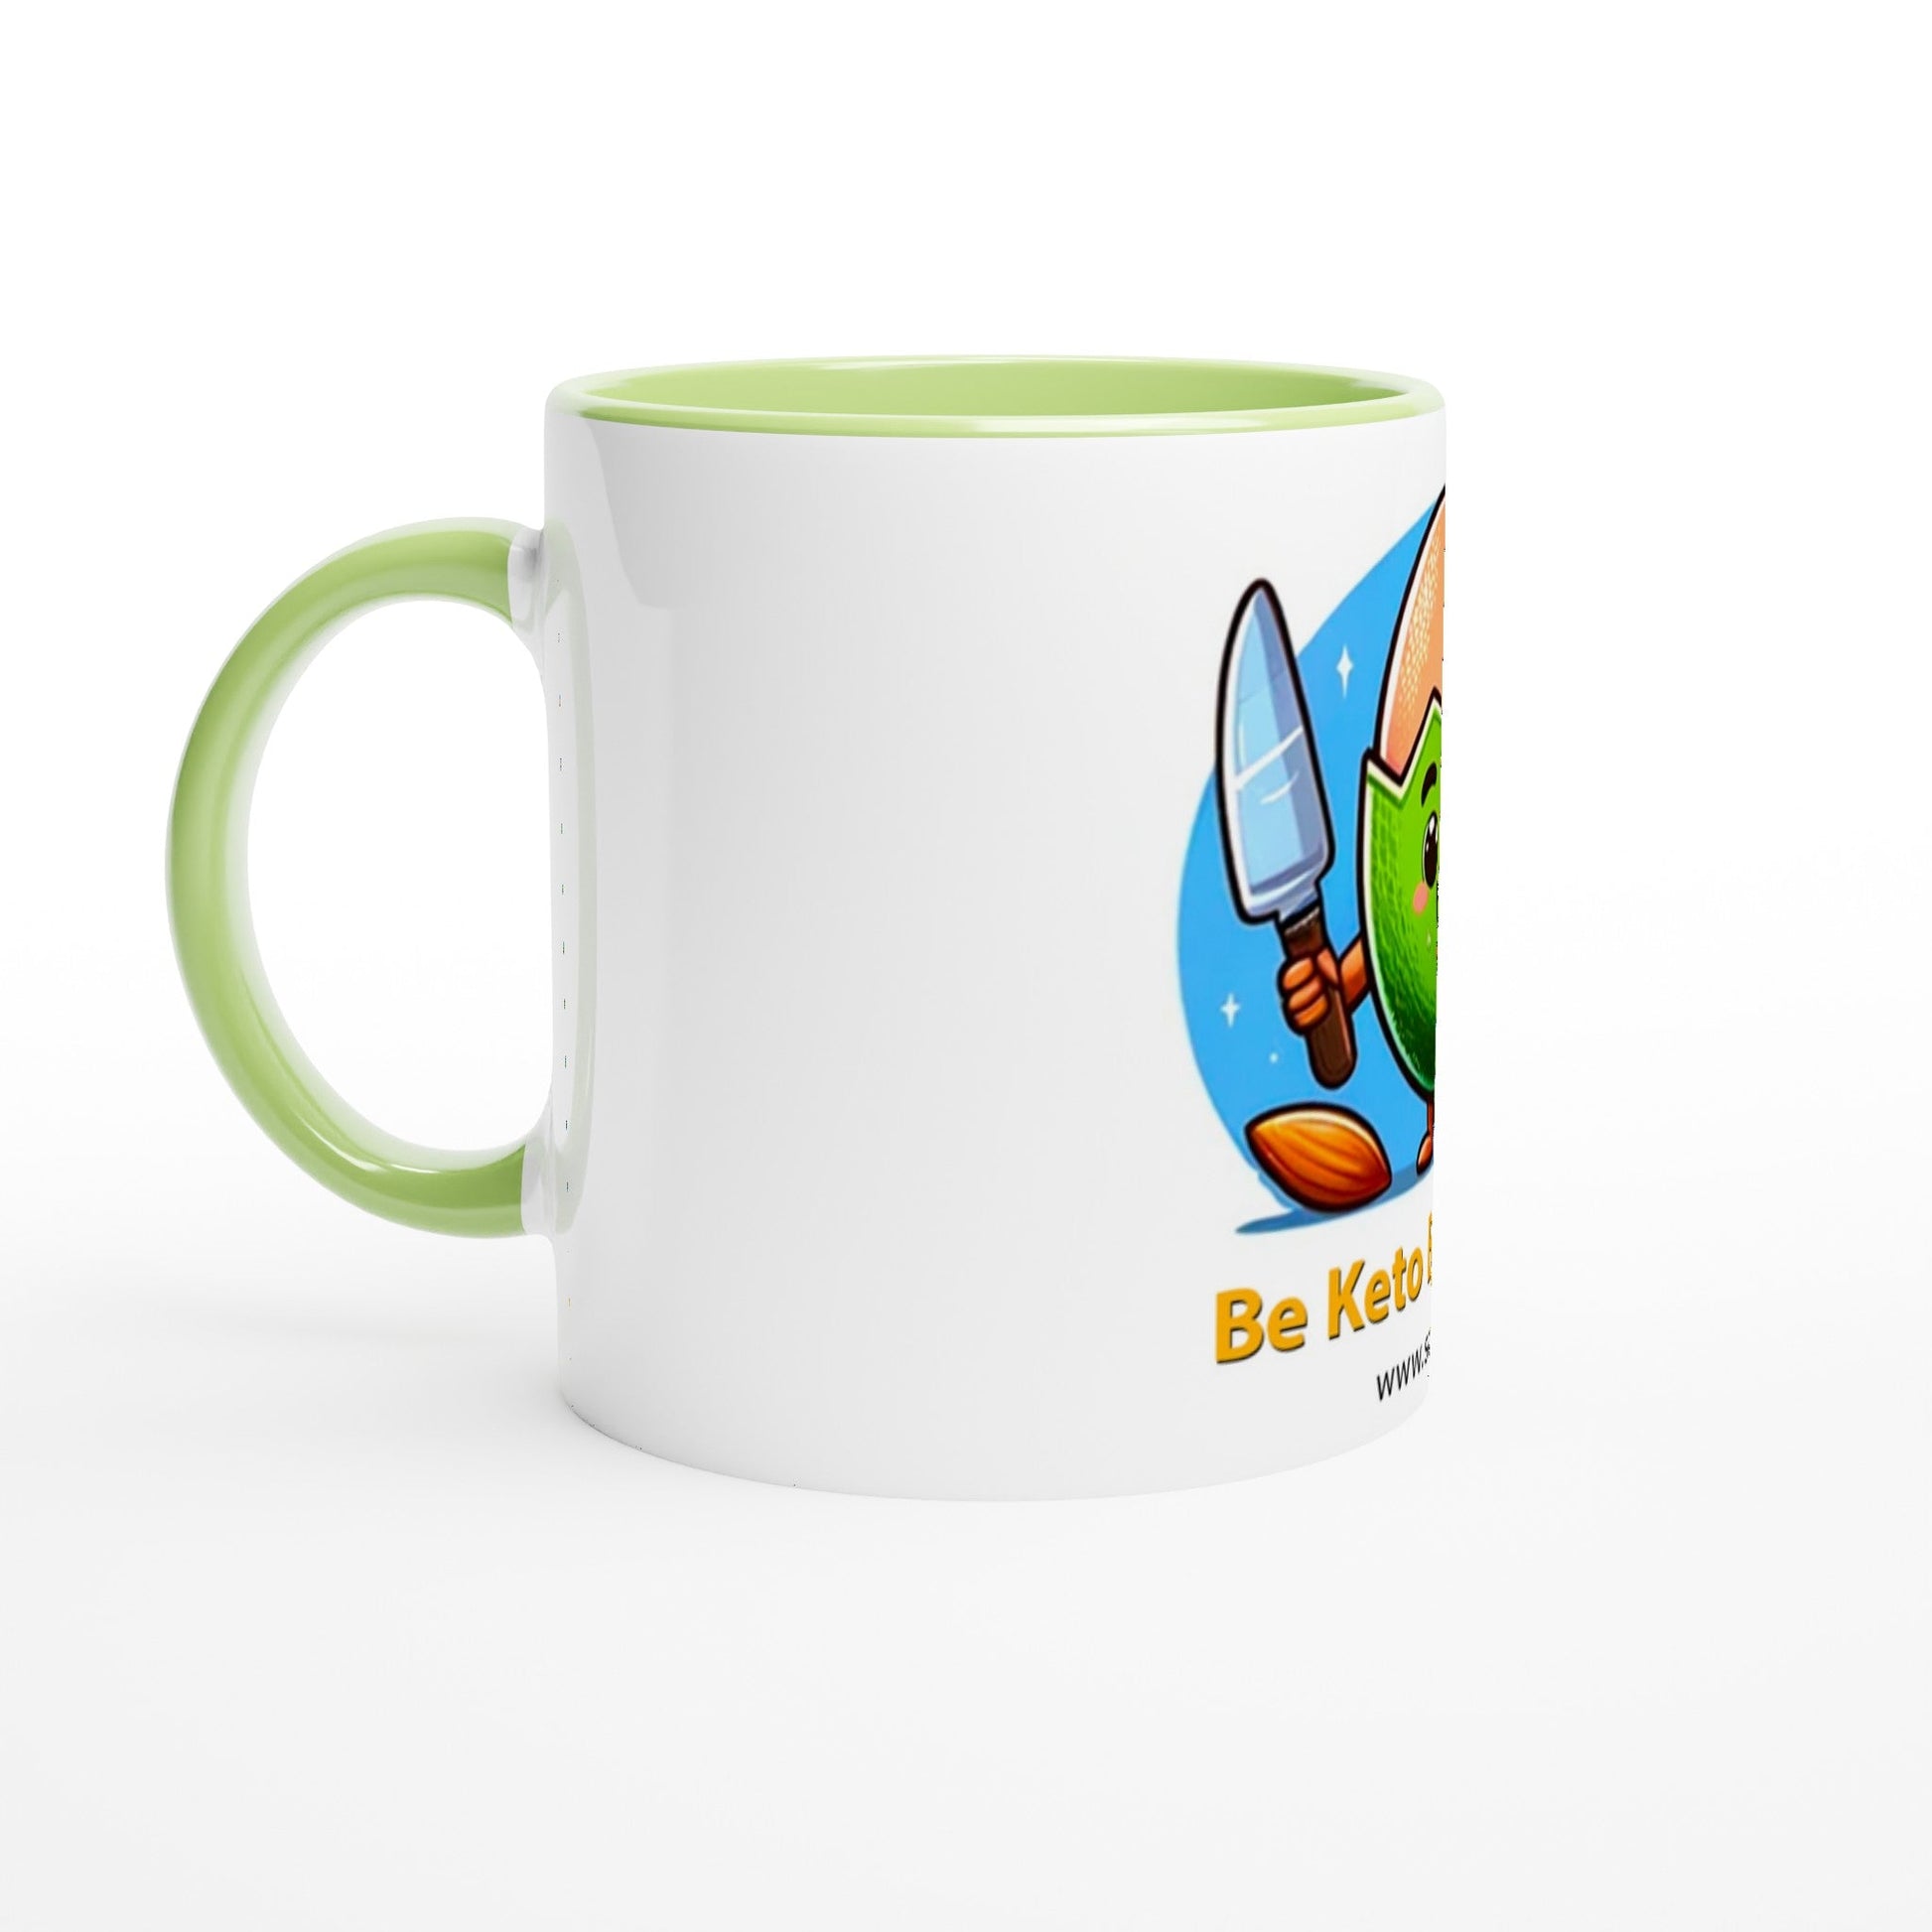 350ml "Be Keto Be Happy" Mug with Colored Interior - Start the Day with Style and Health-9